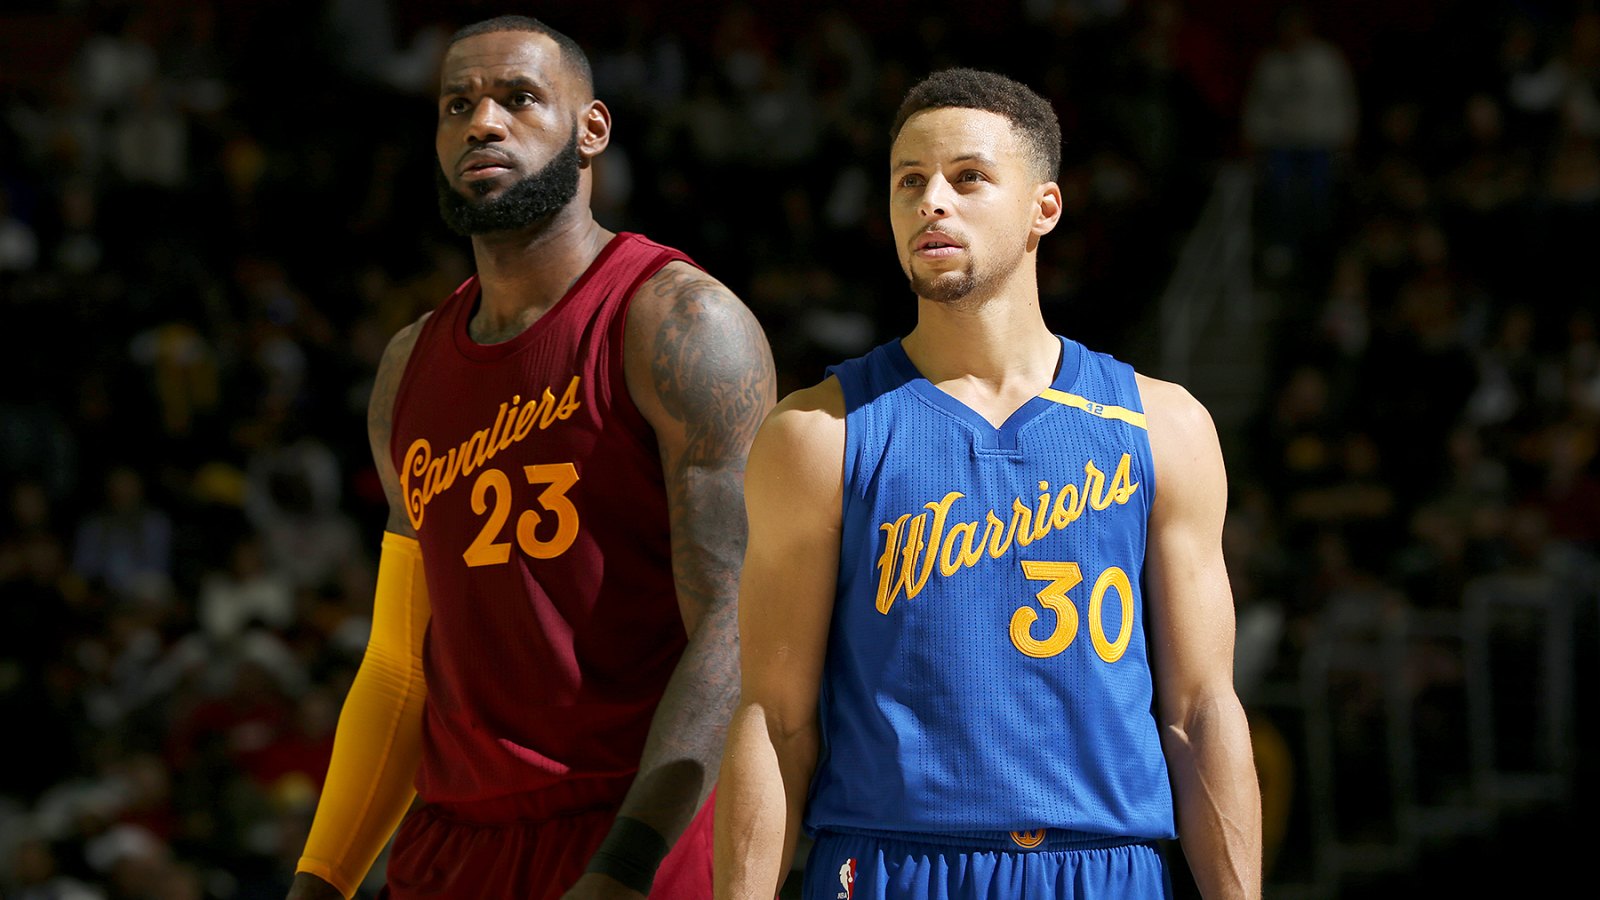 LeBron is so much more taller than Curry